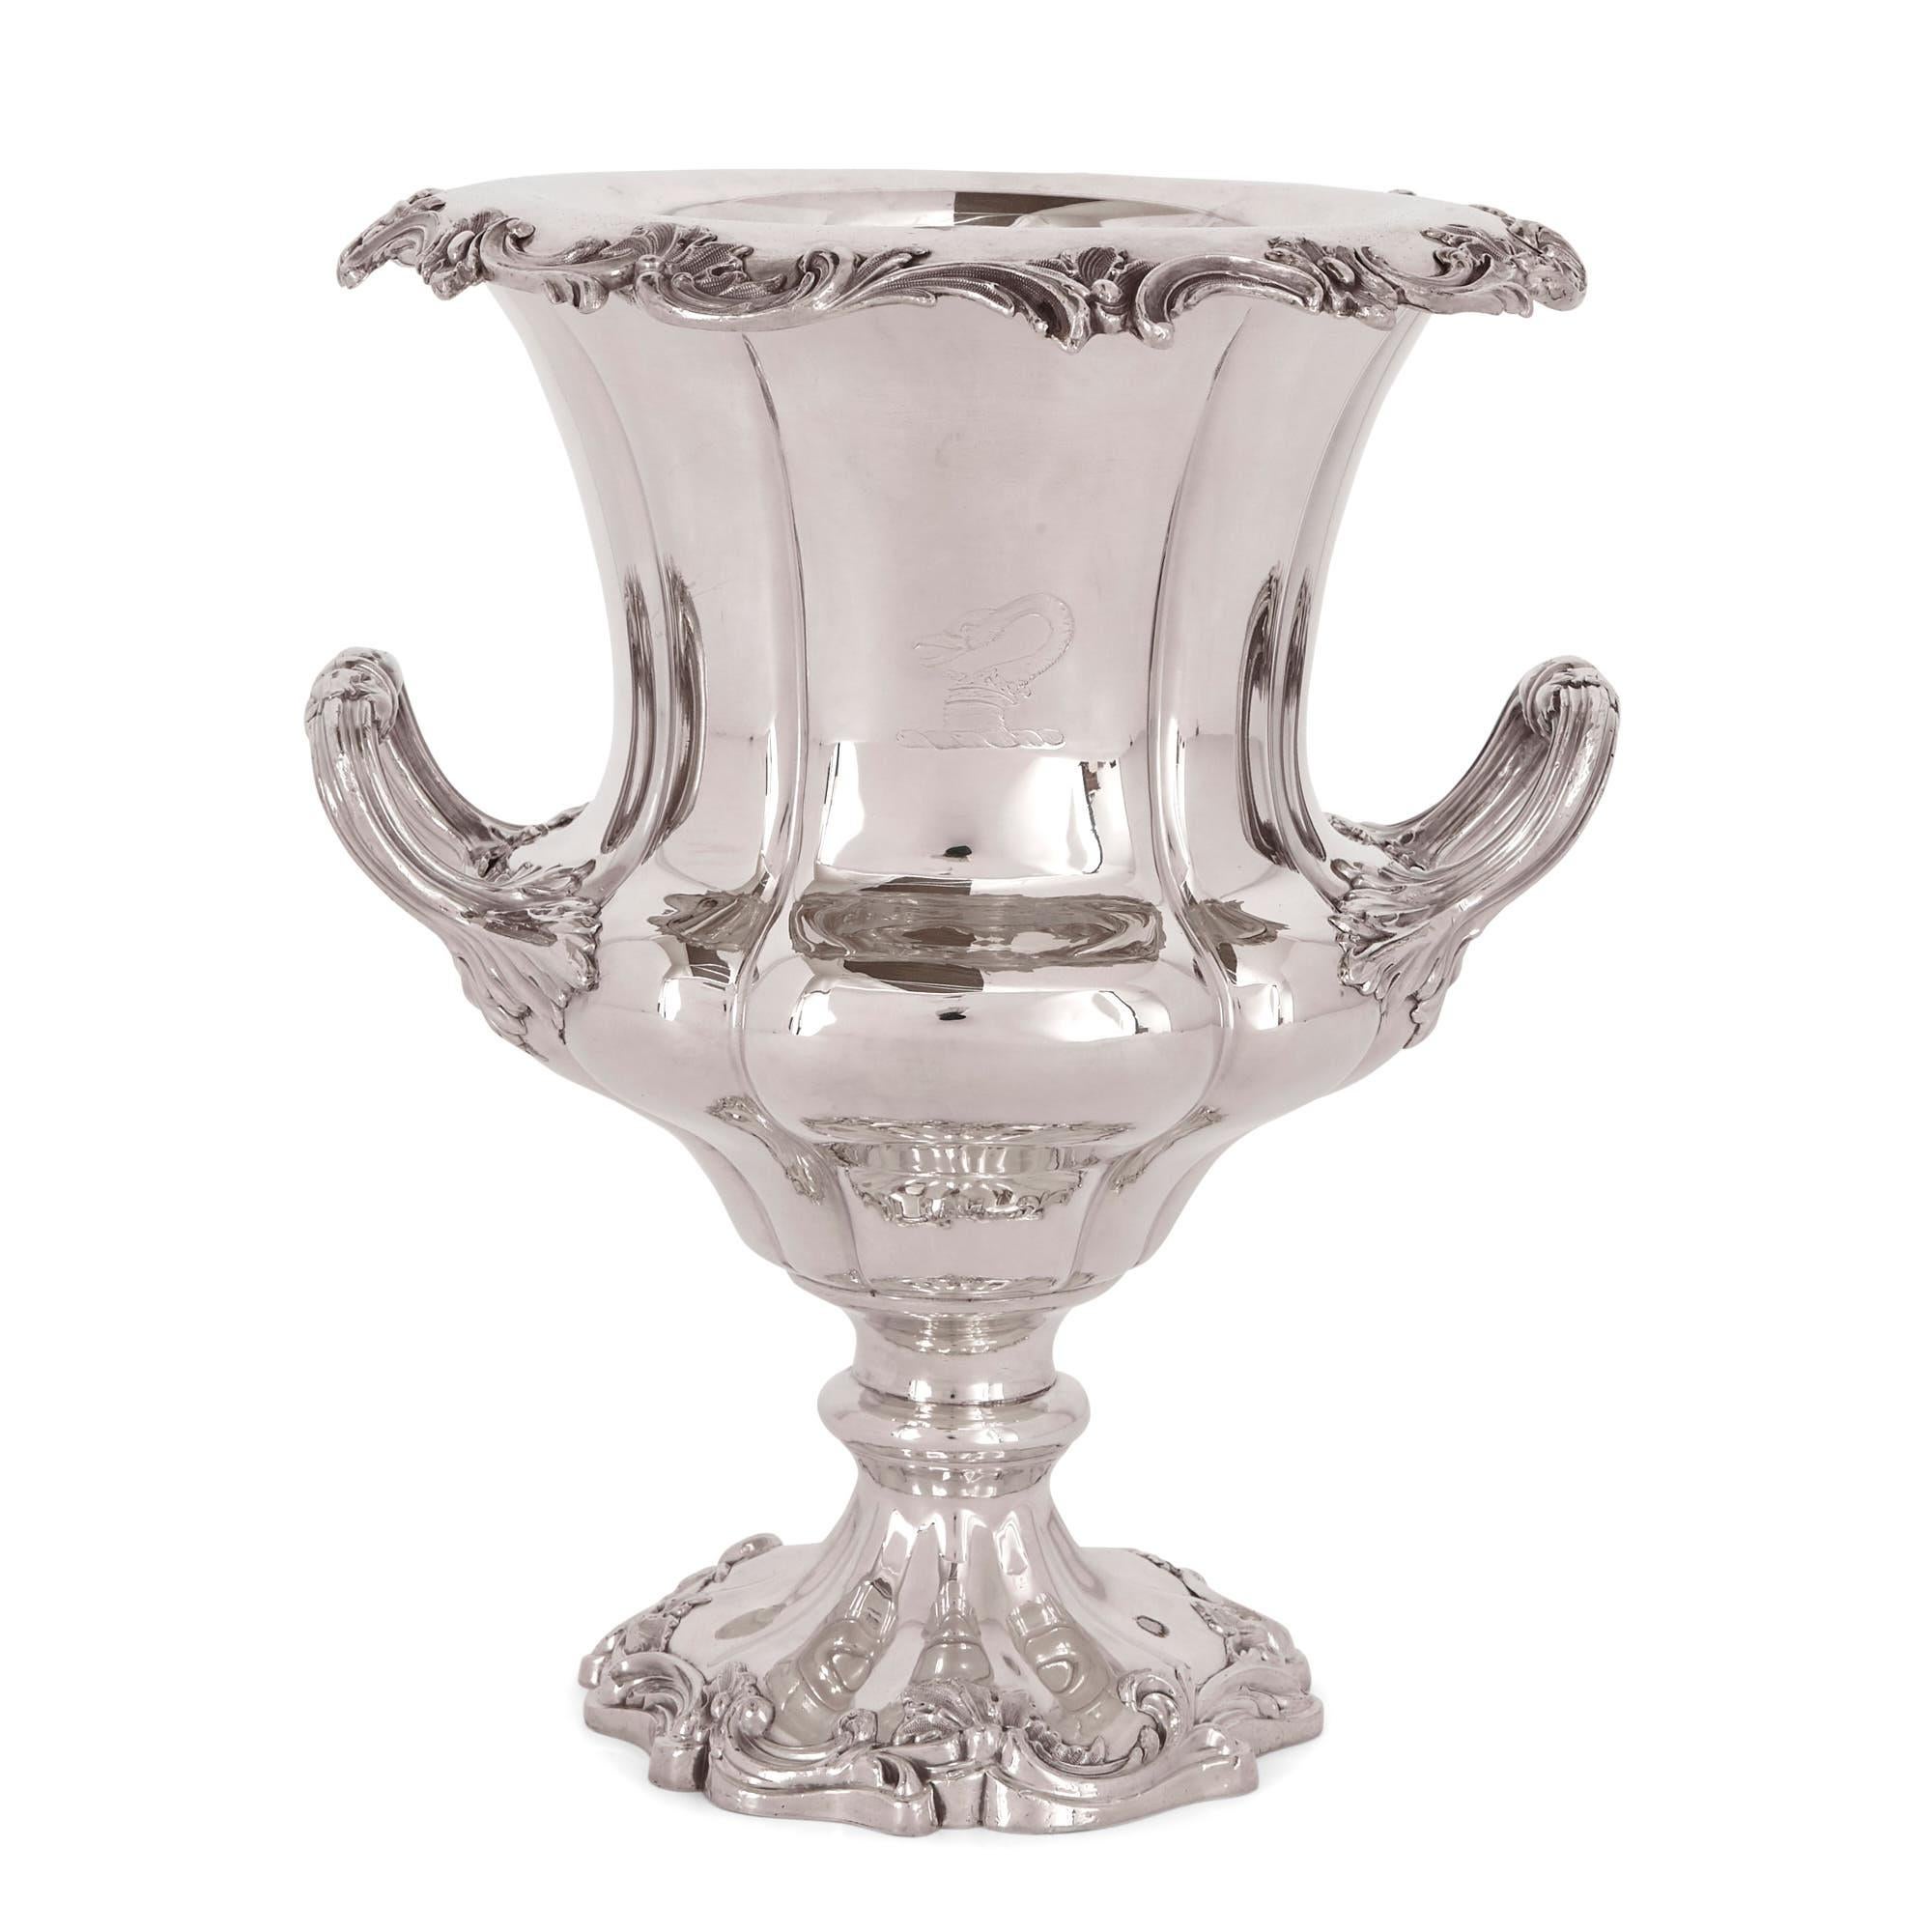 These exquisite silver plated wine coolers are designed in the form of the famous Medici vase. The so-called Medici vase was an ancient bell-shaped krater that was rediscovered in Rome in the Renaissance period.

The wine coolers feature